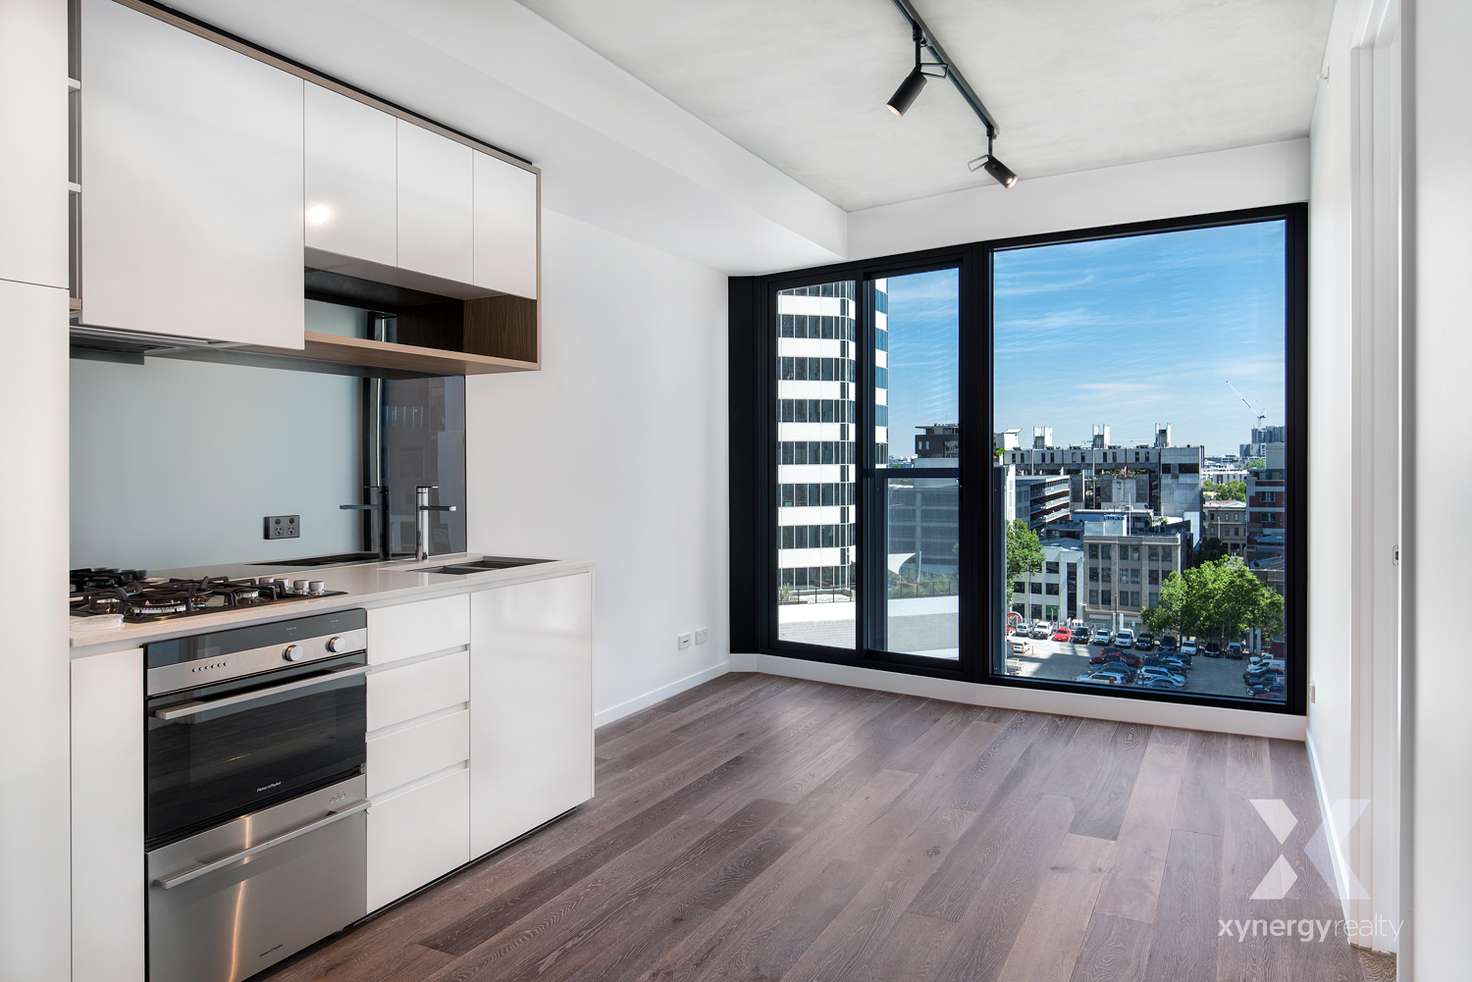 Main view of Homely apartment listing, 302/315 La Trobe Street, Melbourne VIC 3000